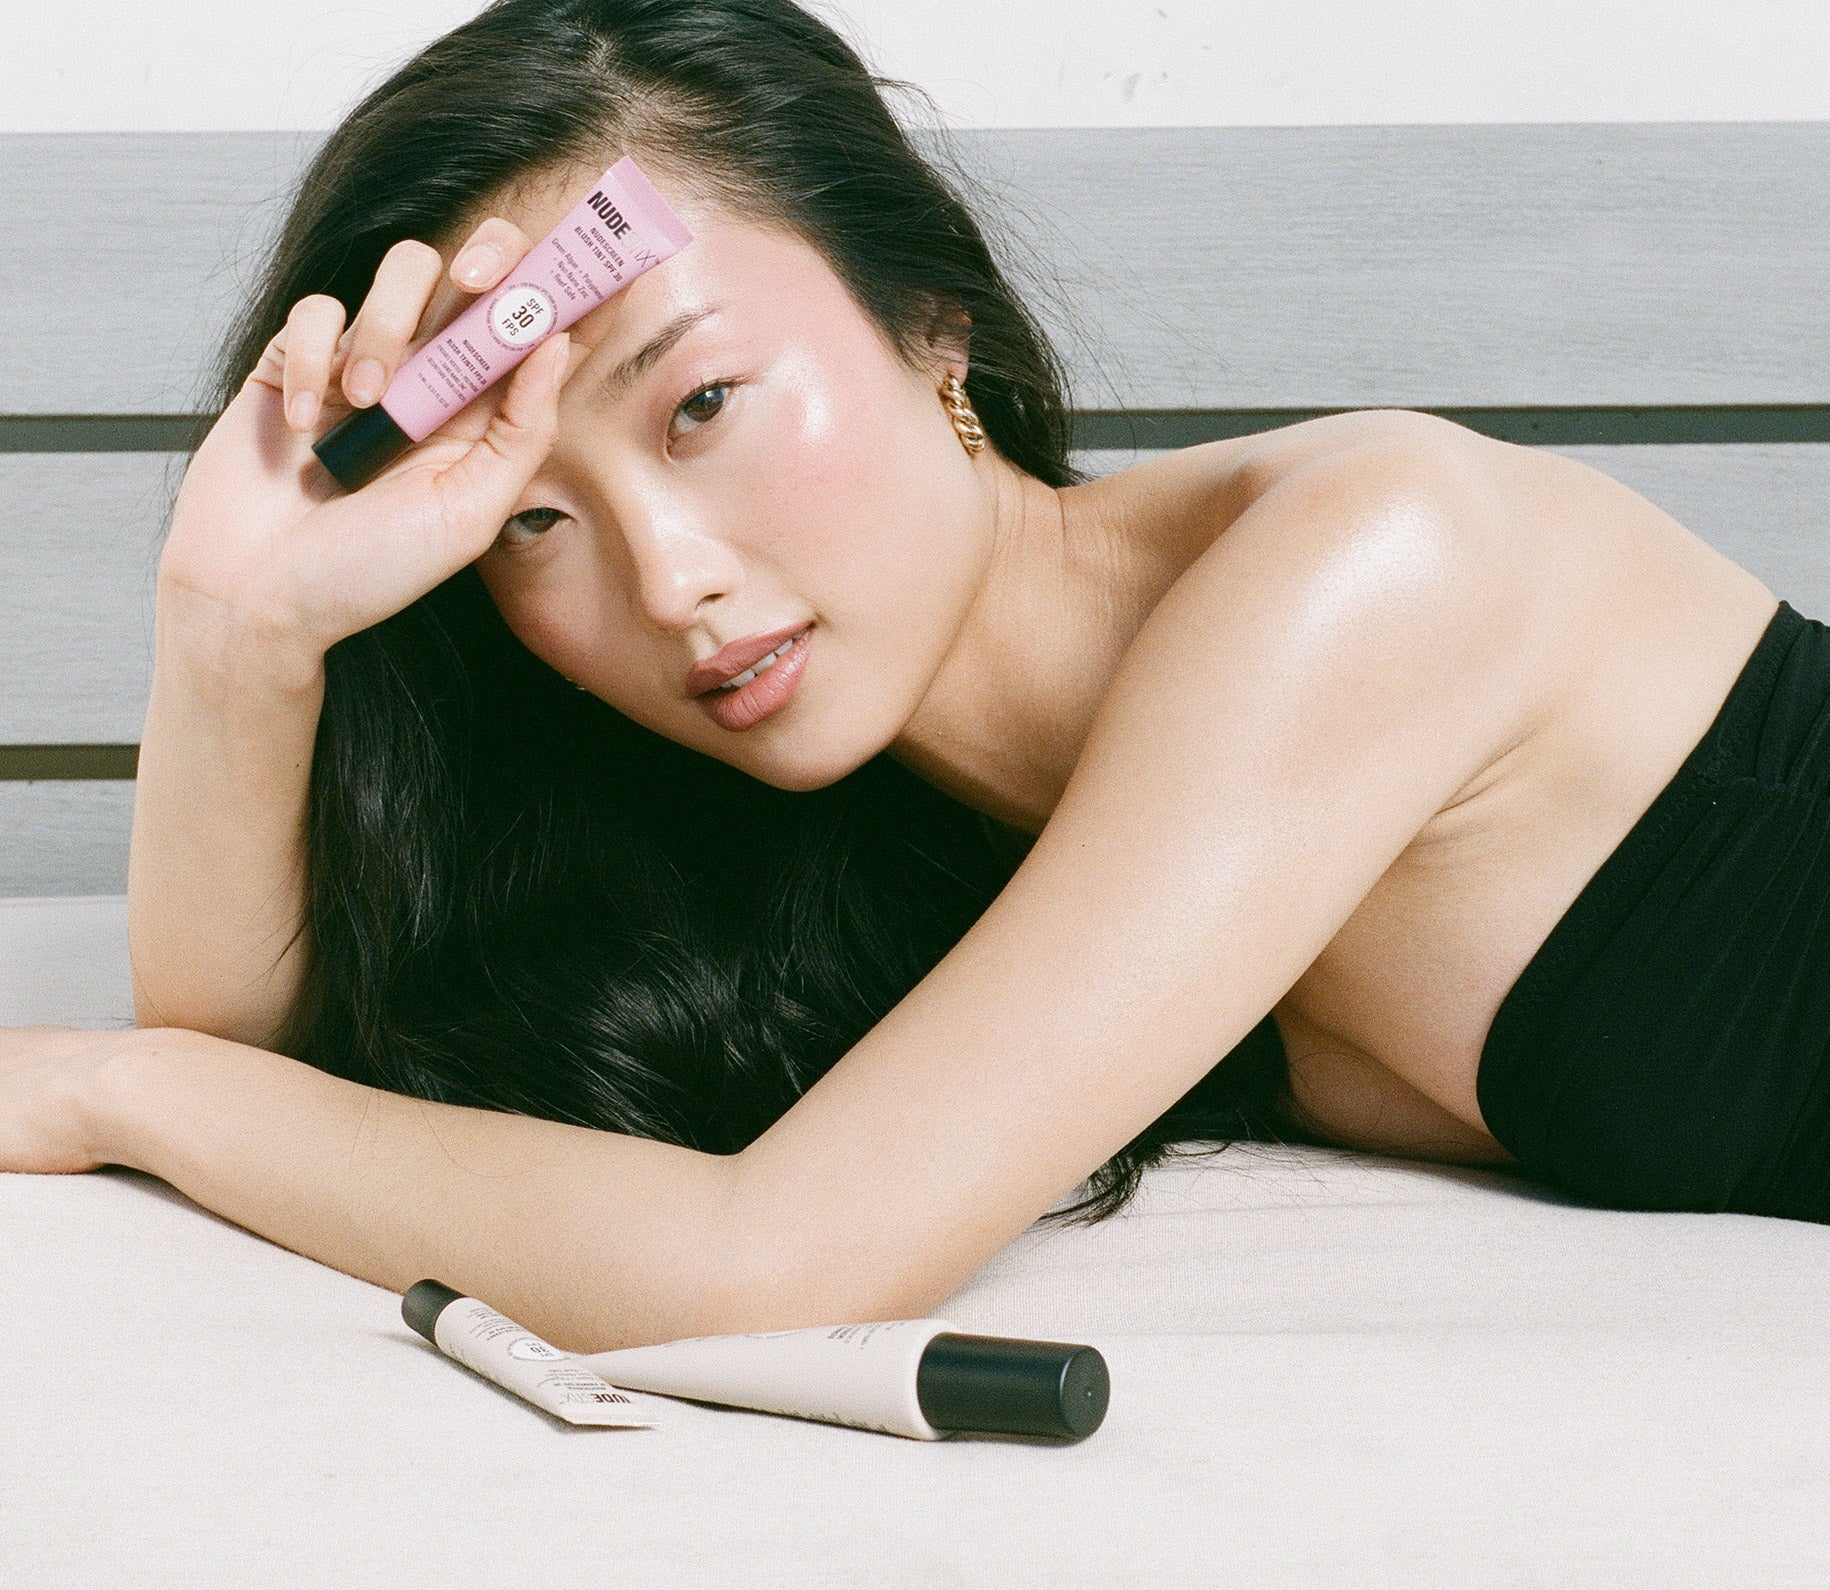 Young Asian woman laying on her side while holding a tube of Nudescreen blush tint